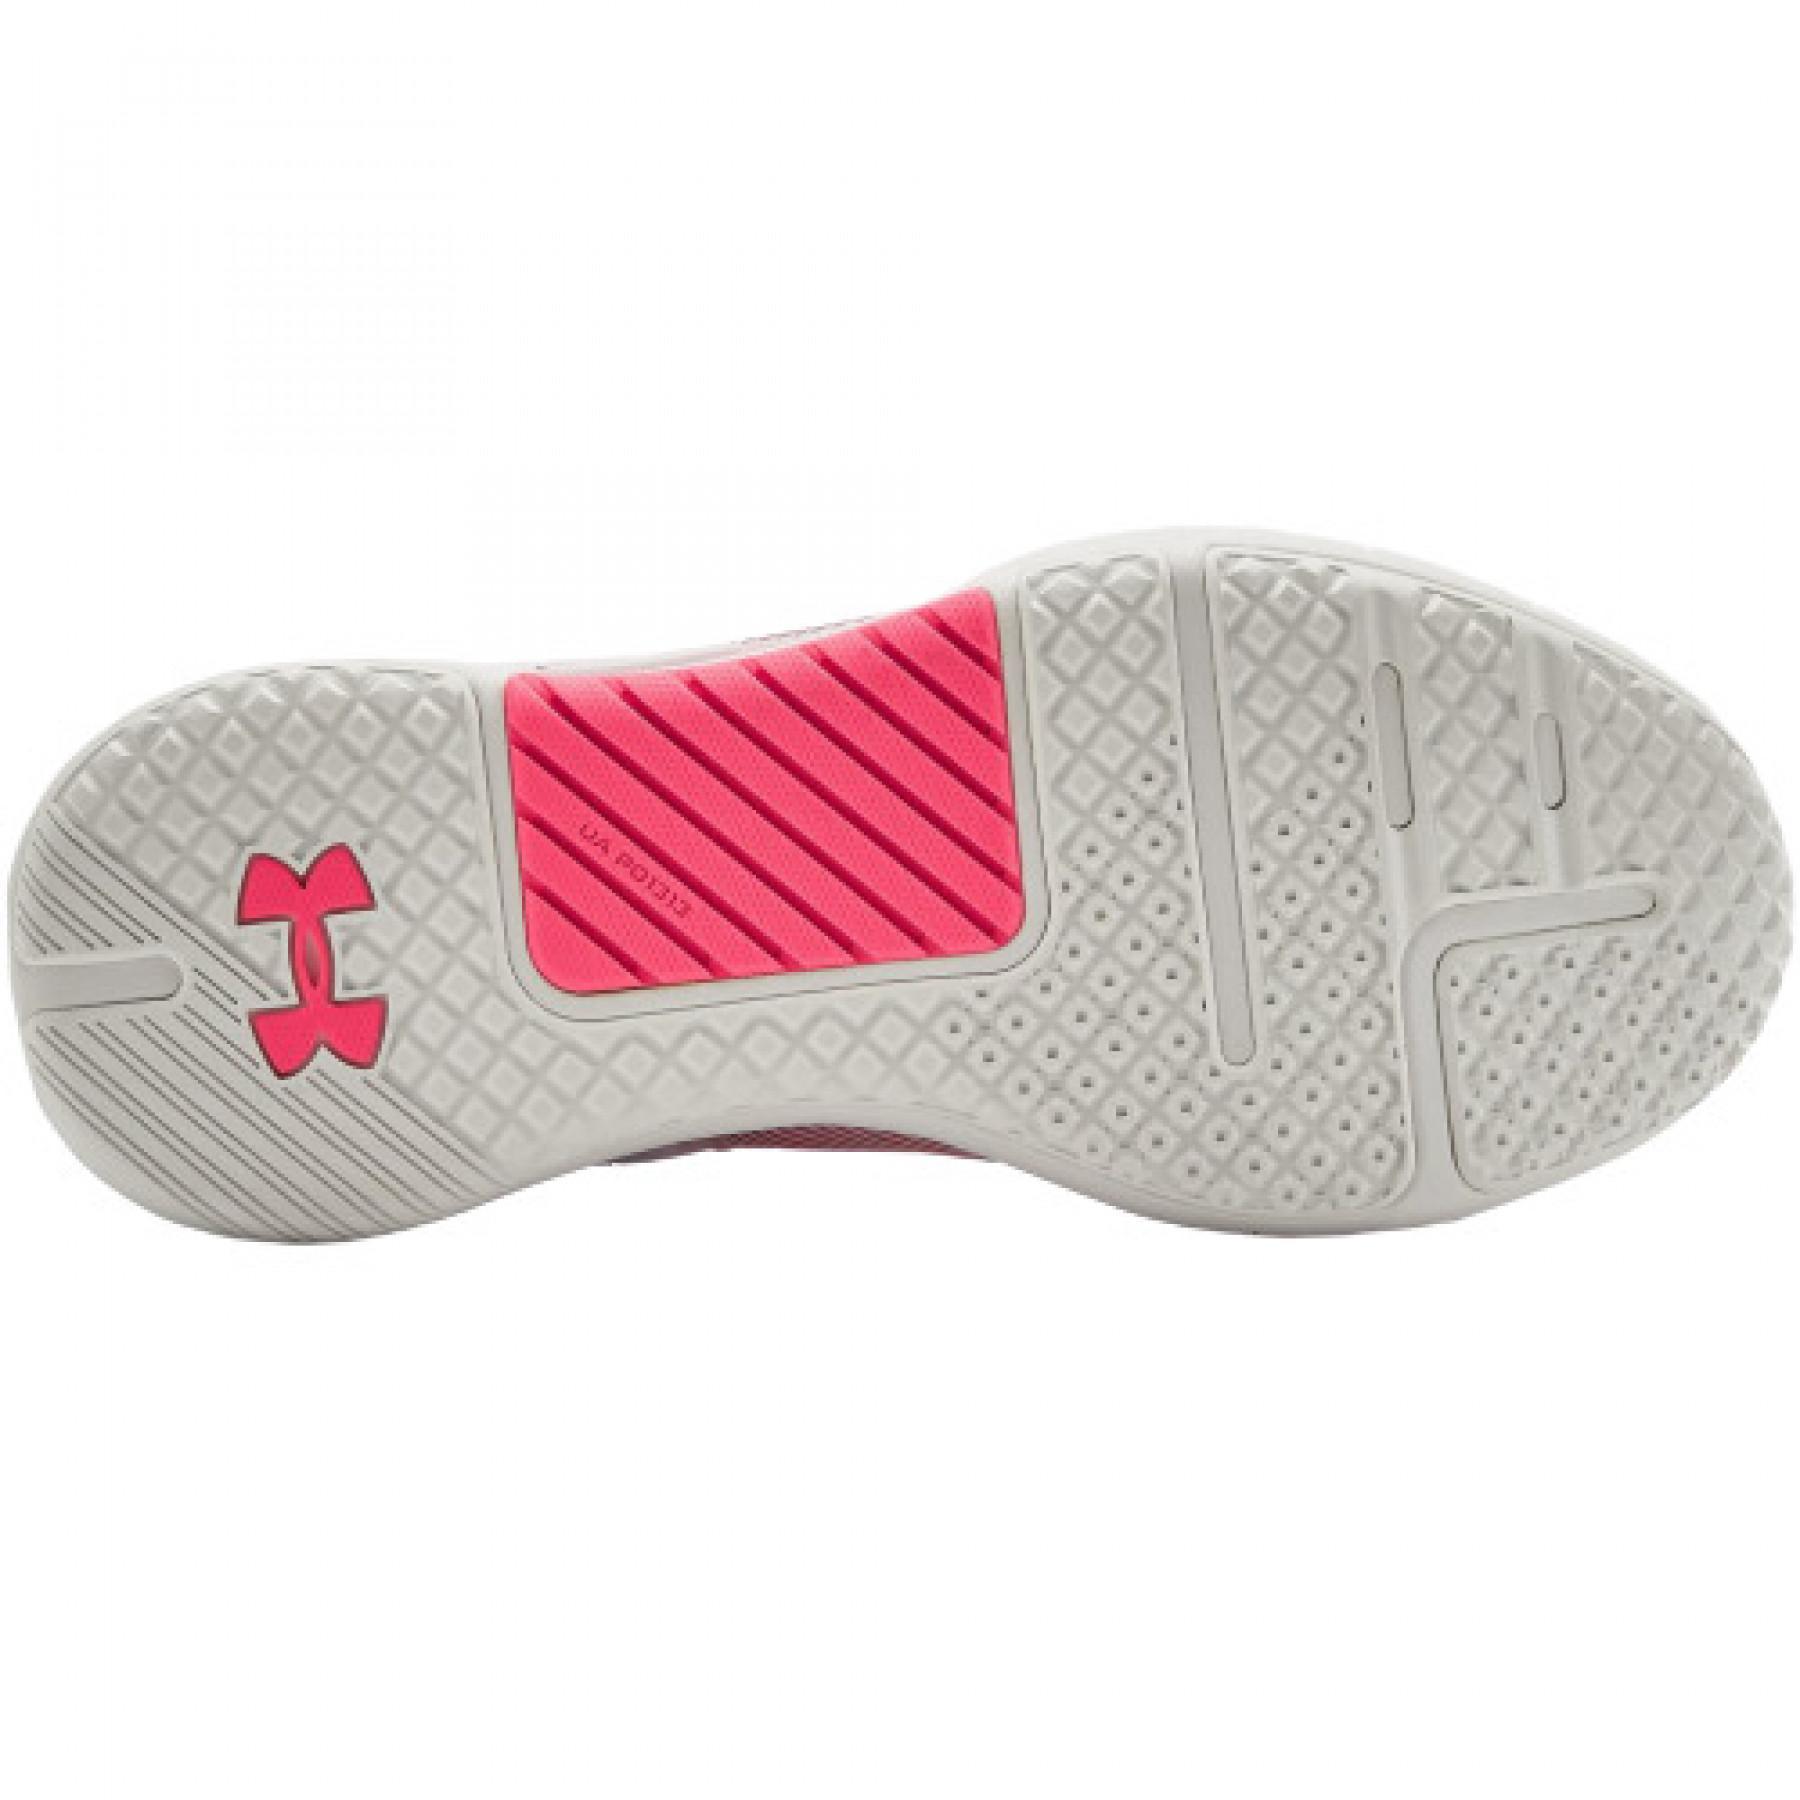 Women's shoes Under Armour HOVR Rise 2